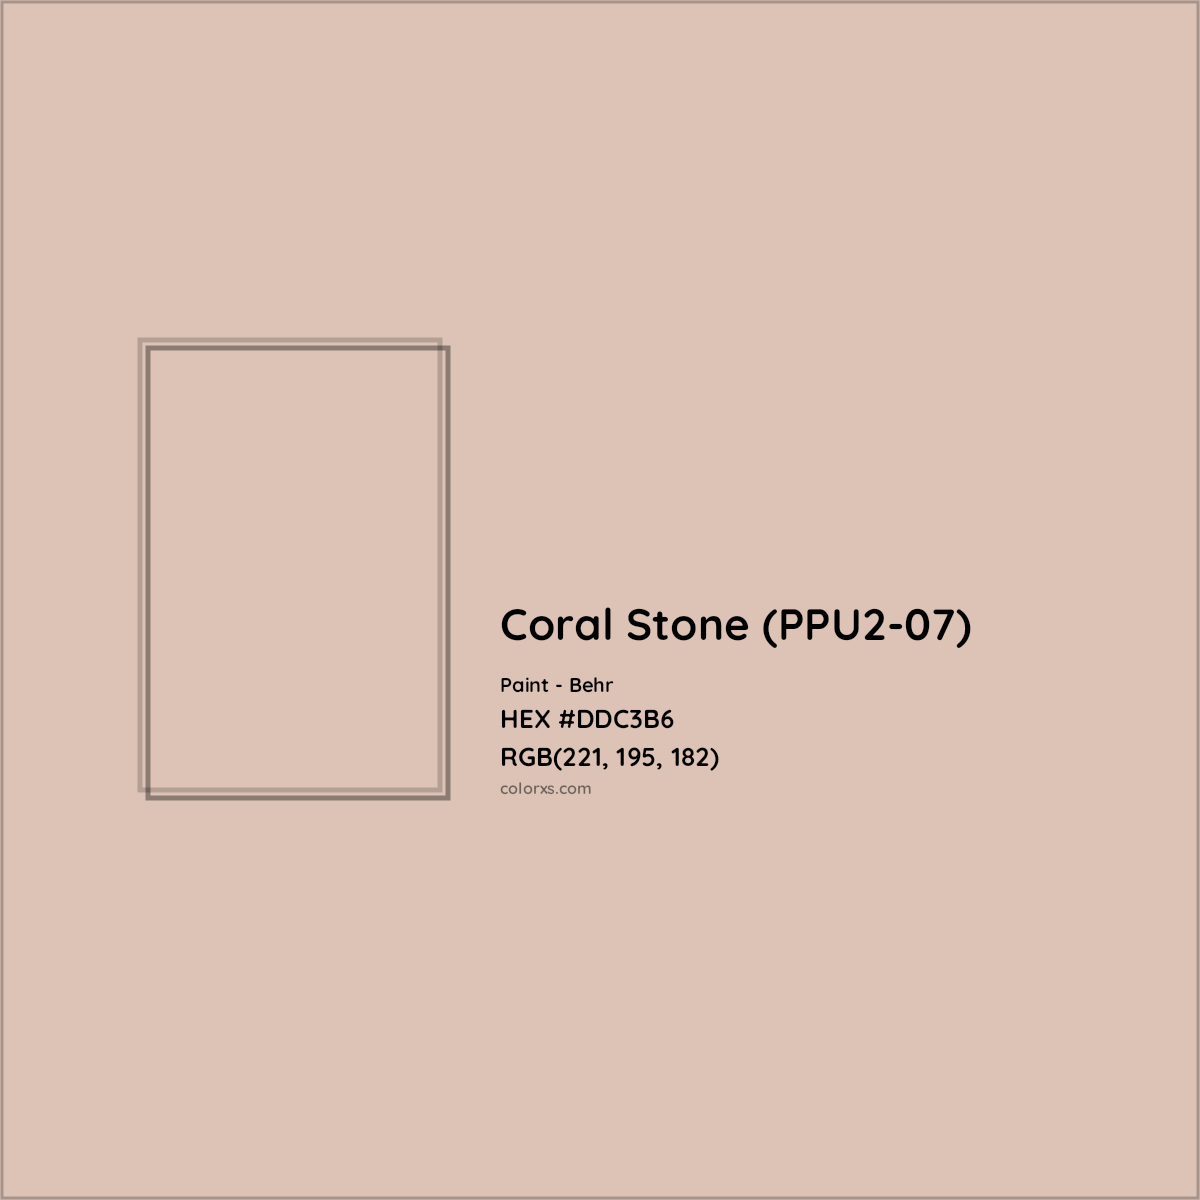 HEX #DDC3B6 Coral Stone (PPU2-07) Paint Behr - Color Code